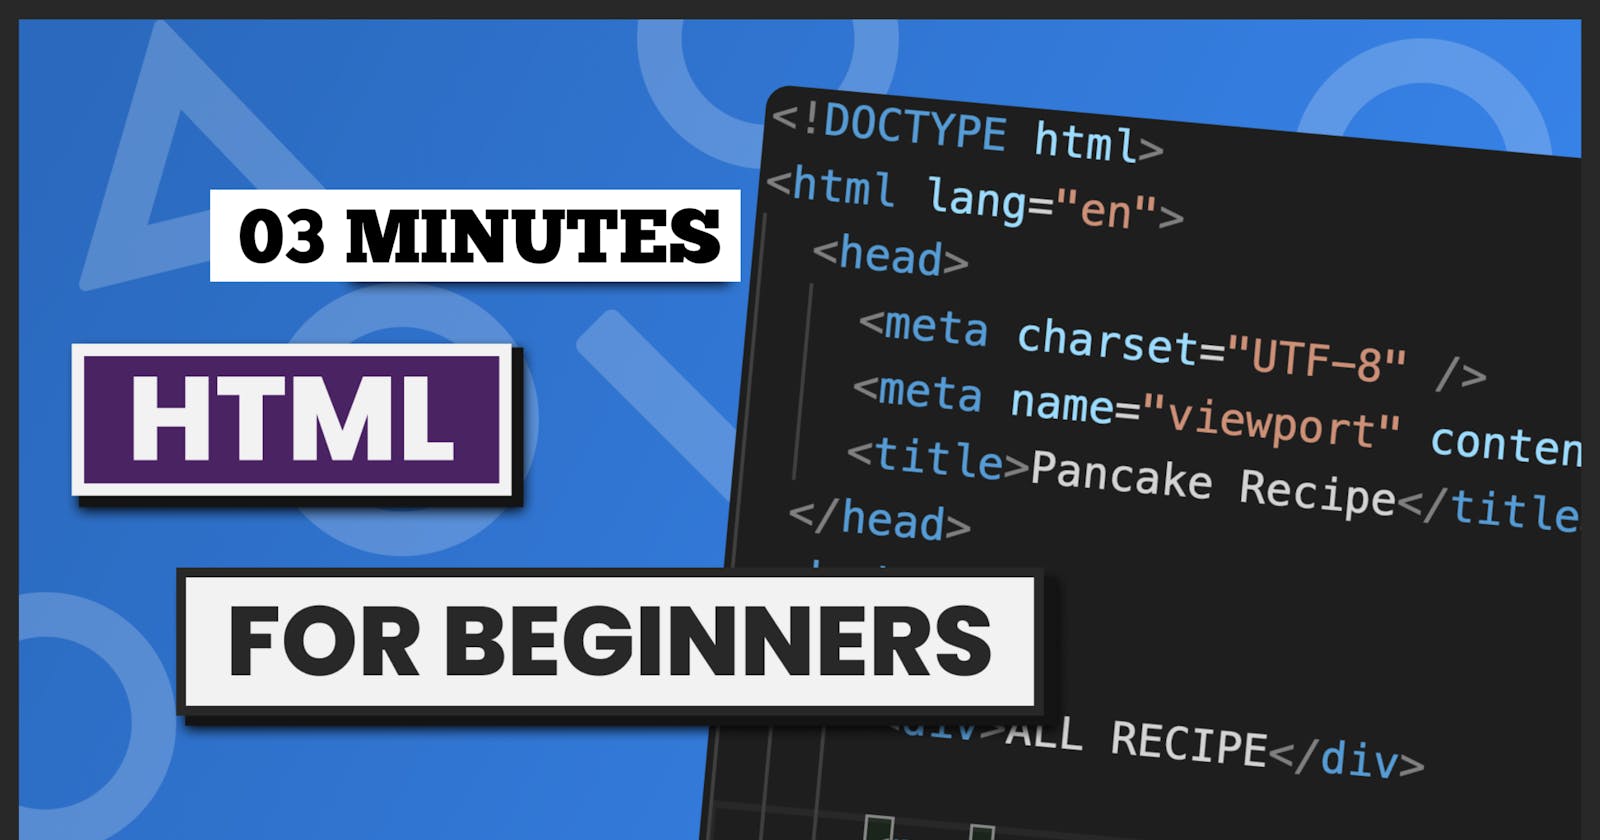 Basic Information in HTML for beginners ( web development ).

What is HTML?